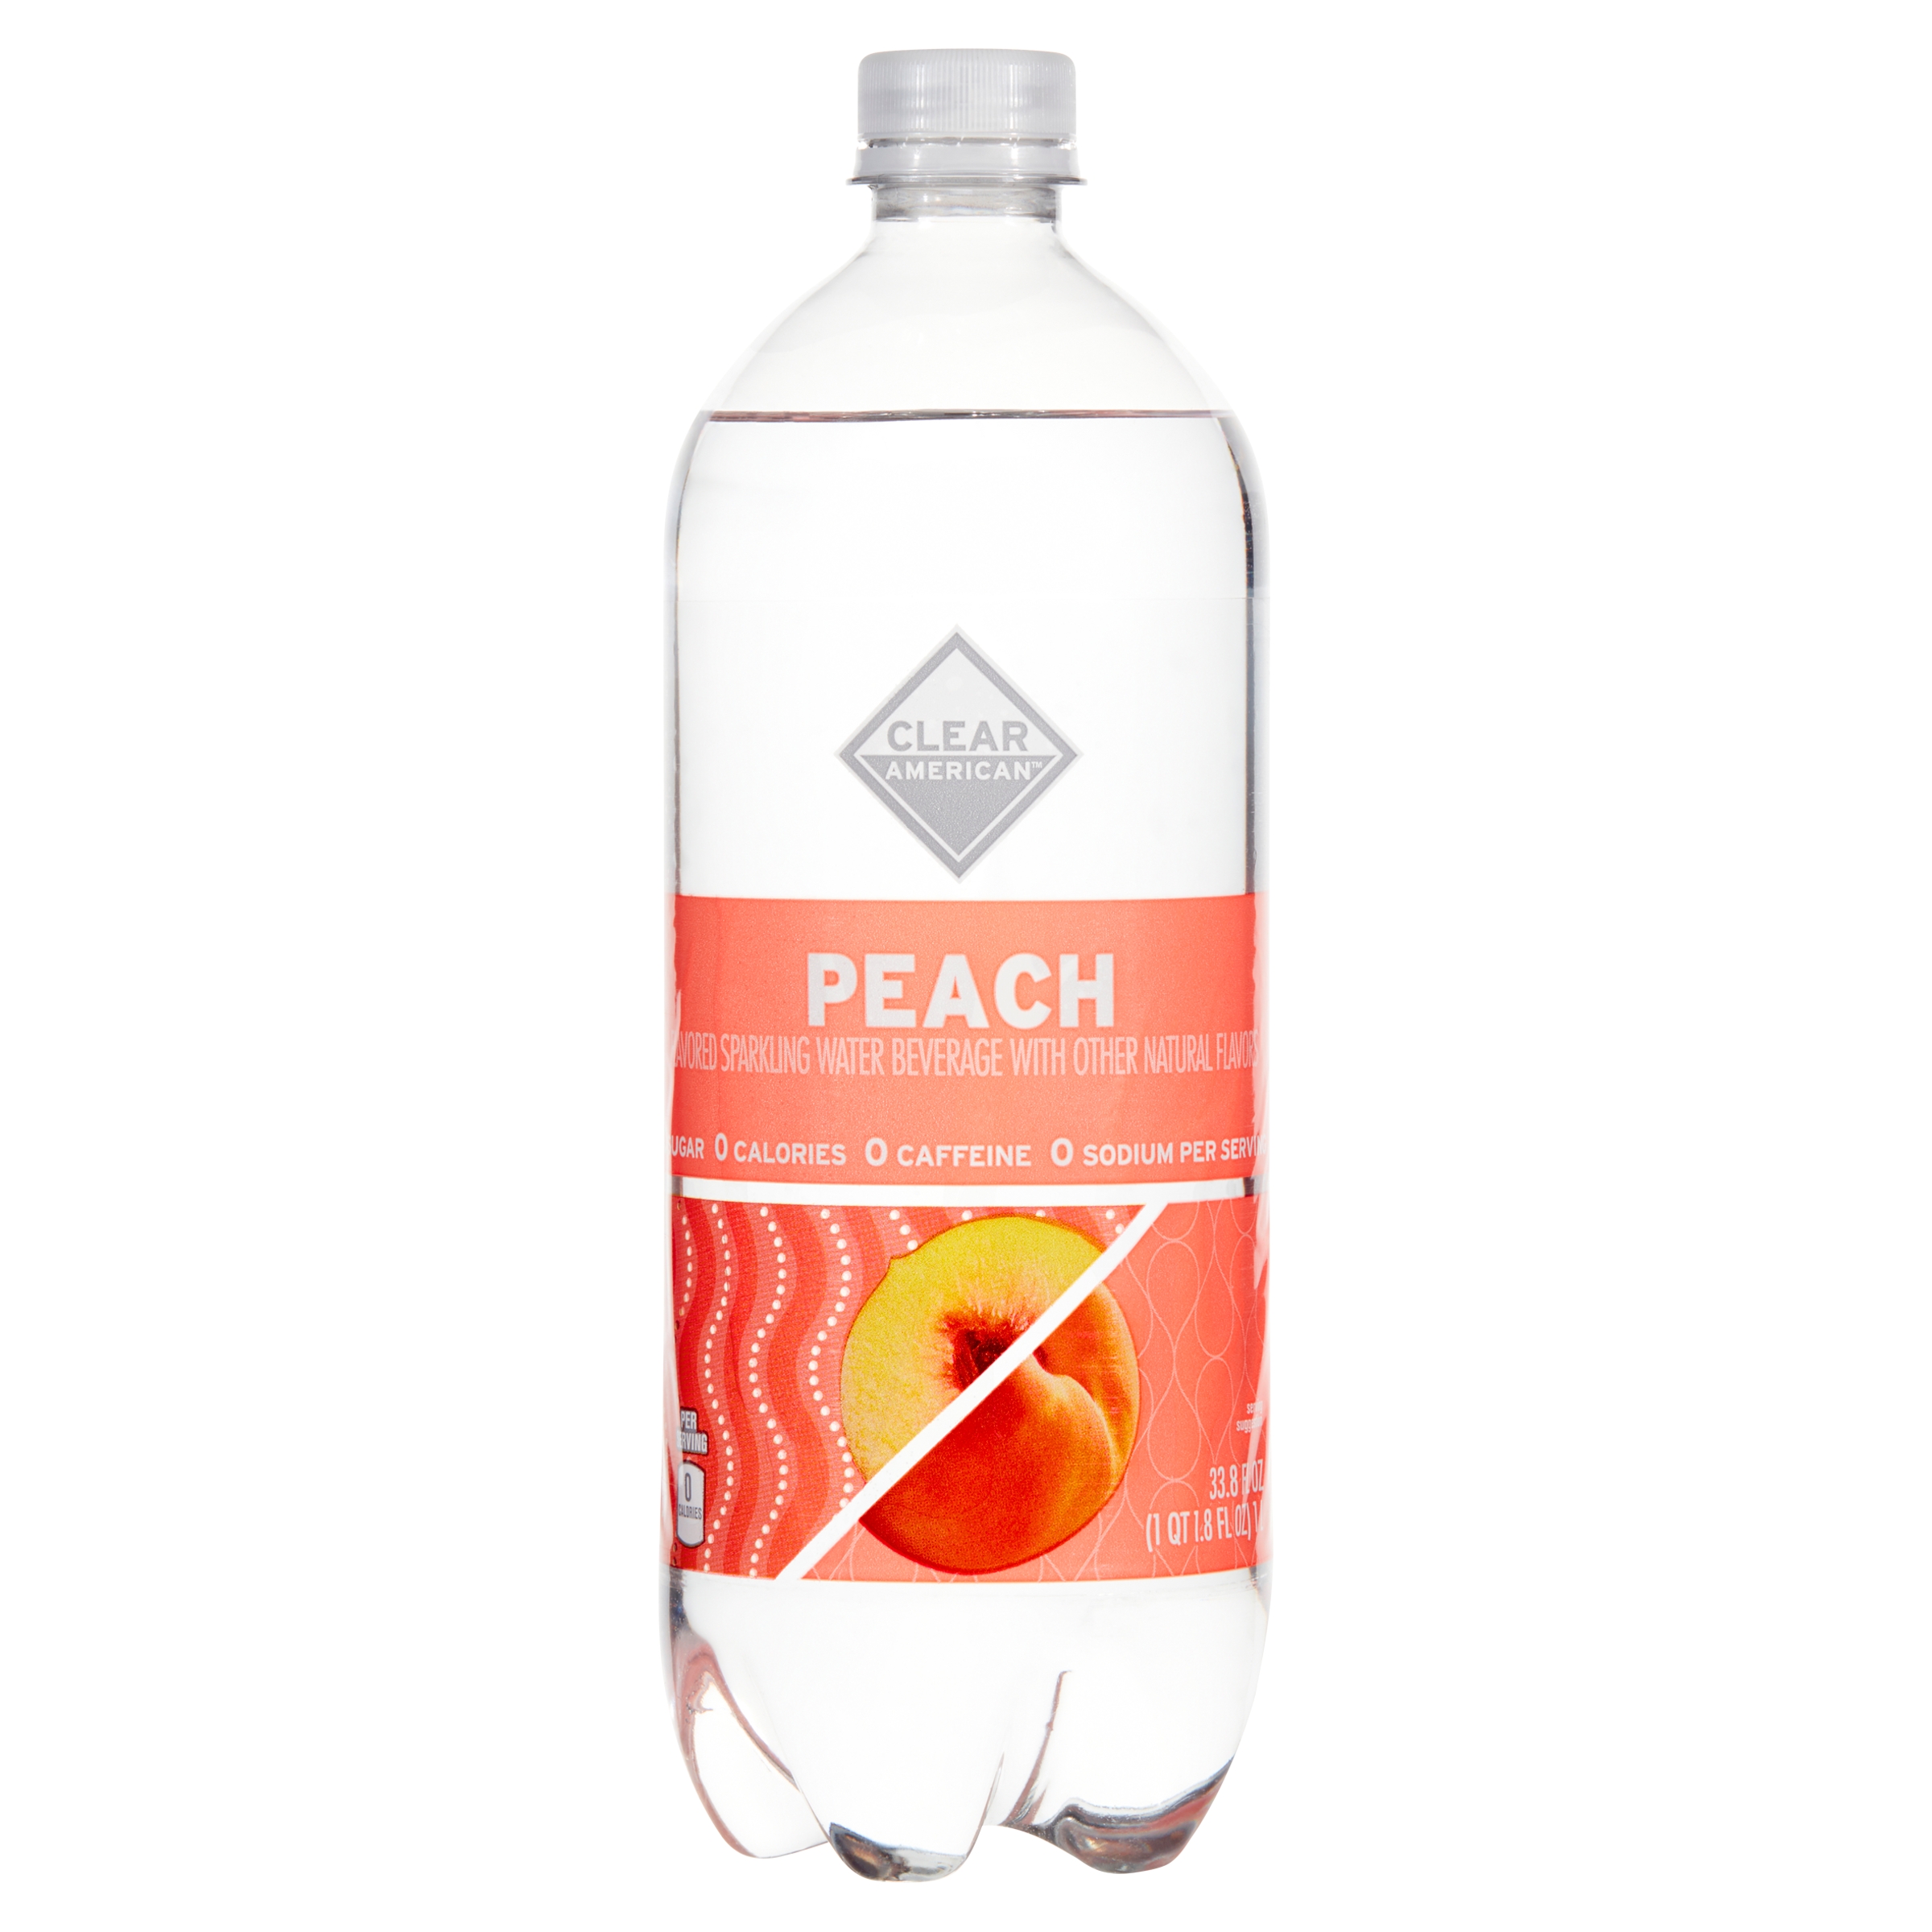 Clear American Peach Sparkling Water, 33.8 fl oz - image 1 of 7